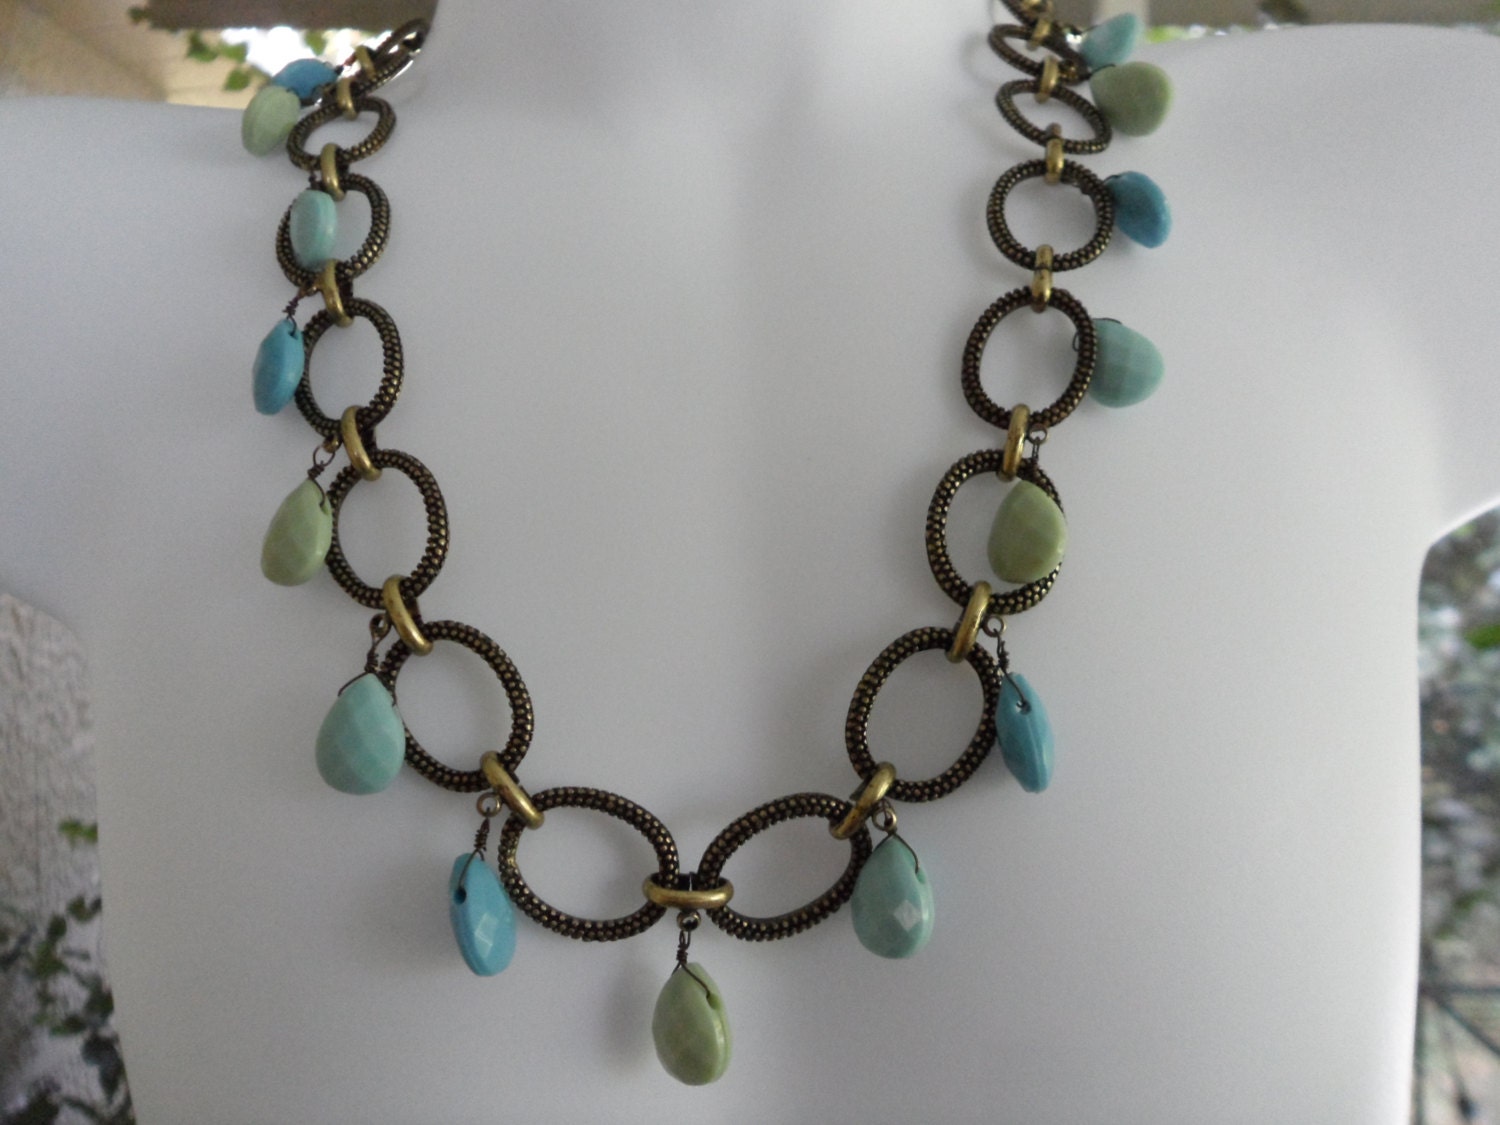 70s Necklace Hippie Chick Gypsy Choker Turquoise Drop Necklace